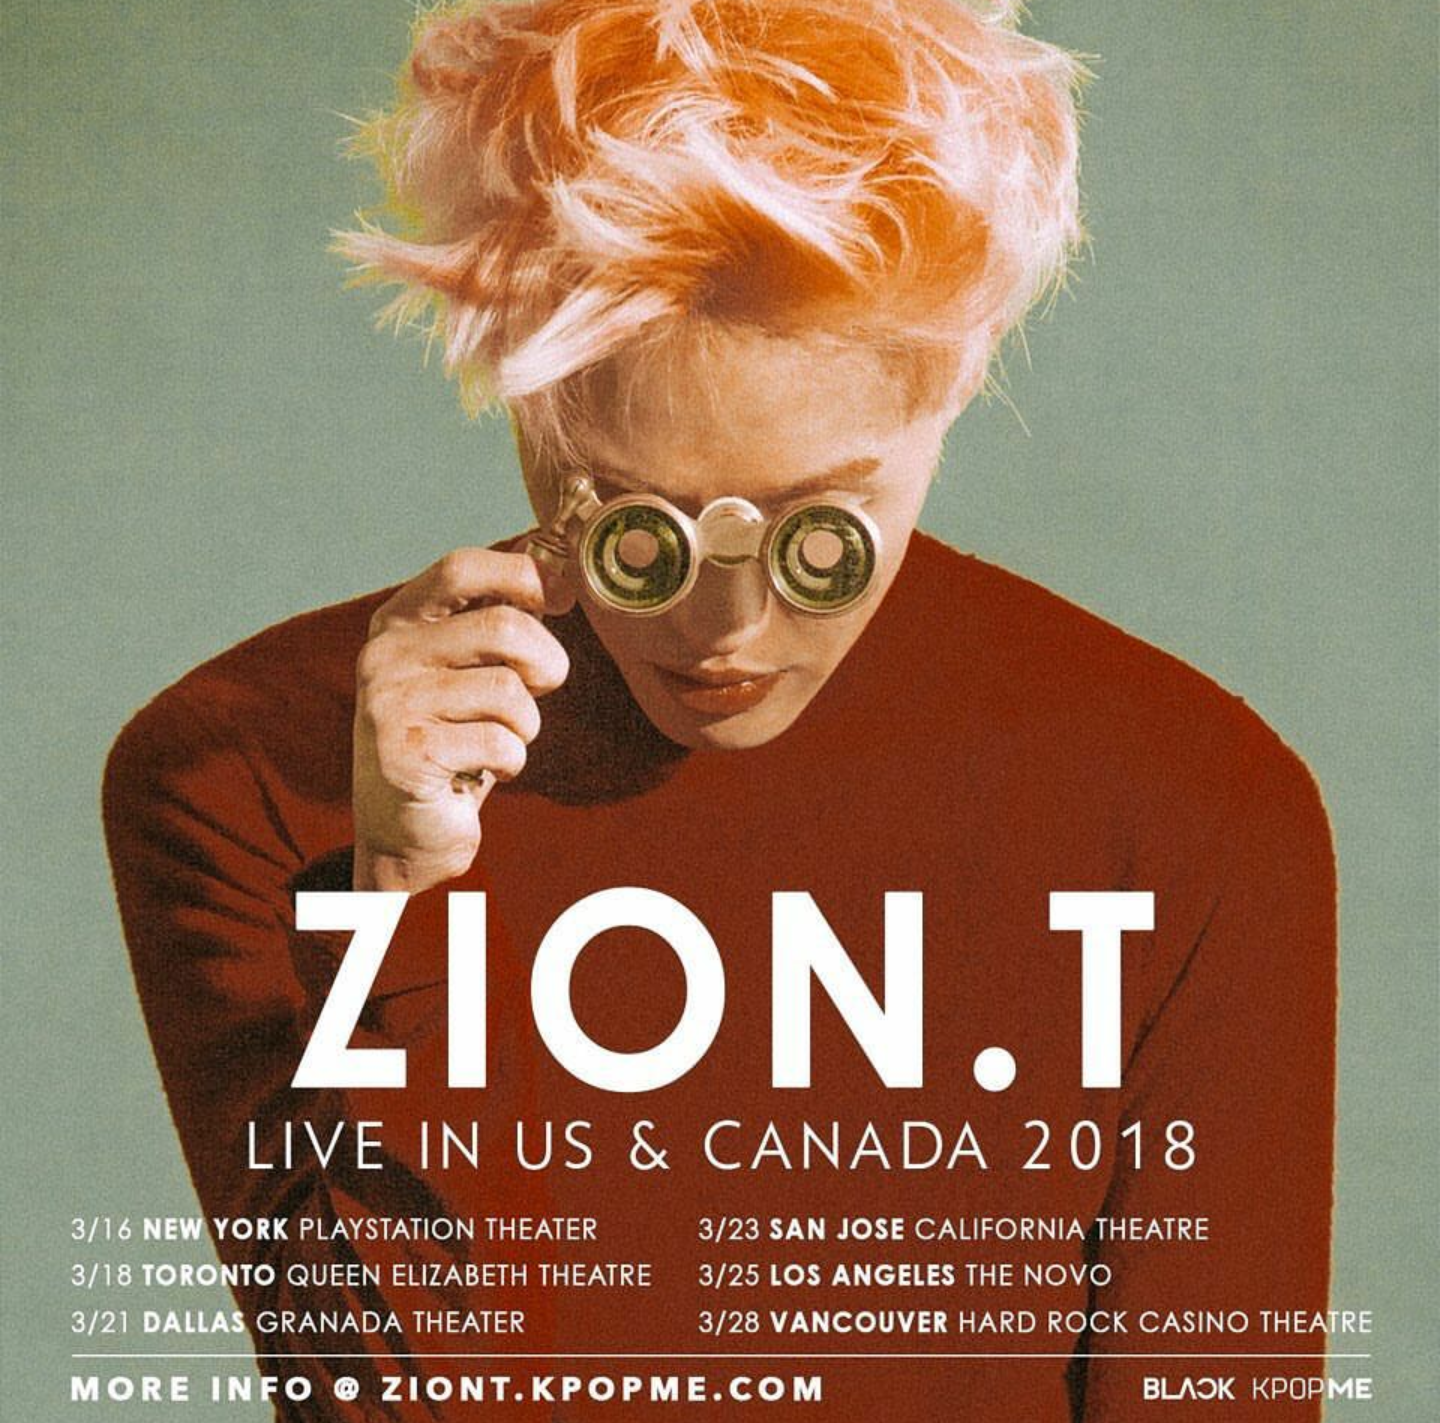 South korean r&b singer zion.t is bringing his smooth style to the u.s. Concert Watch Zion T U S Canada Tour